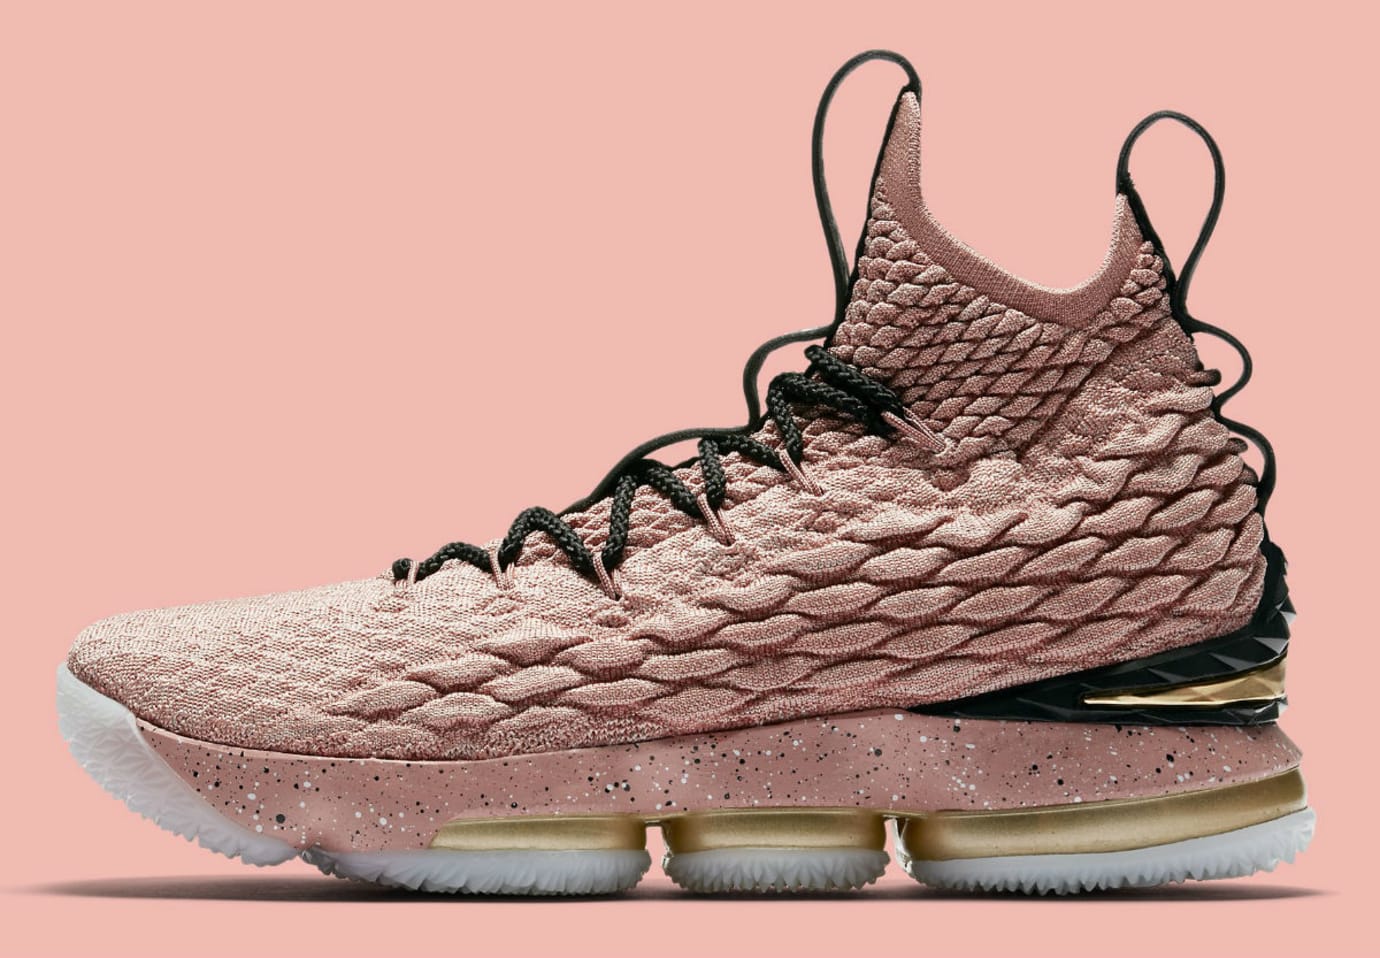 Nike LeBron 15 All-Star Pink Release Date 897650-600 Profile